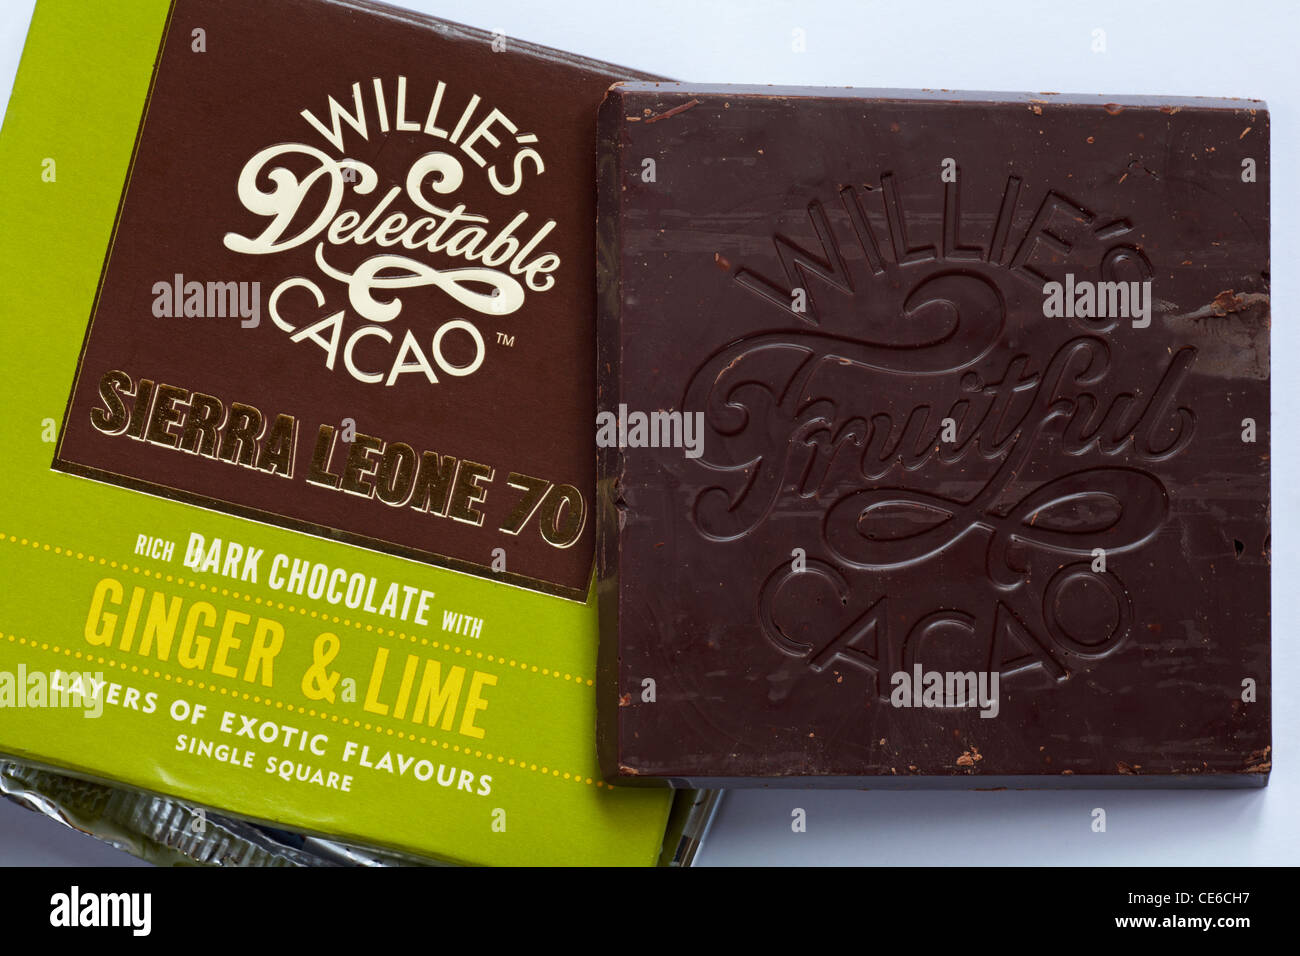 Bar of Willie's Delectable Cacao Sierra Leone 70 chocolate bar on white background Stock Photo